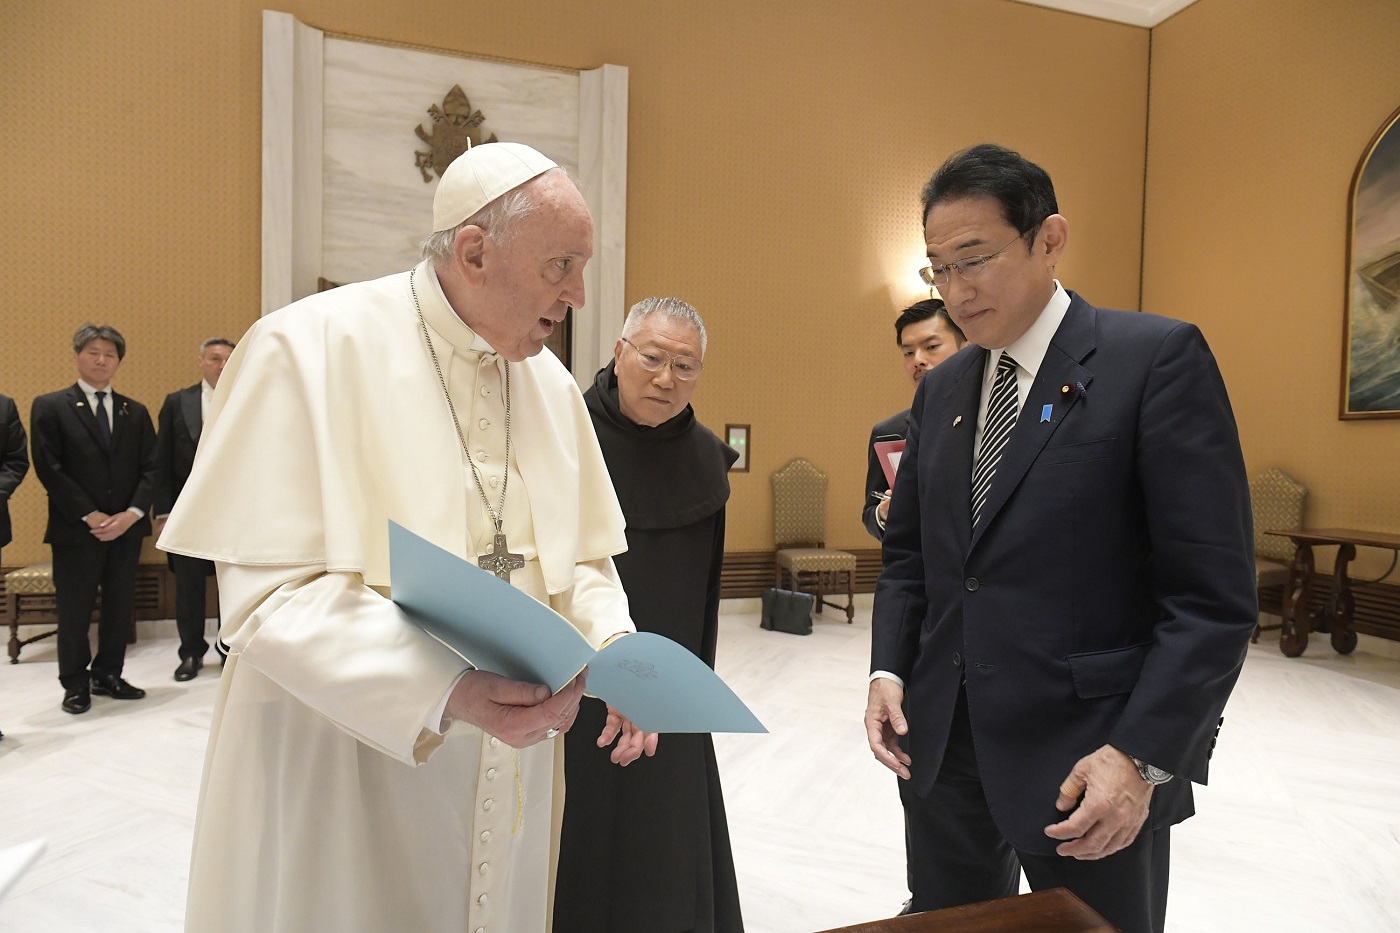 Photograph of the Prime Minister having an audience with Pope Francisco (photo courtesy of VaticanMedia) (4)